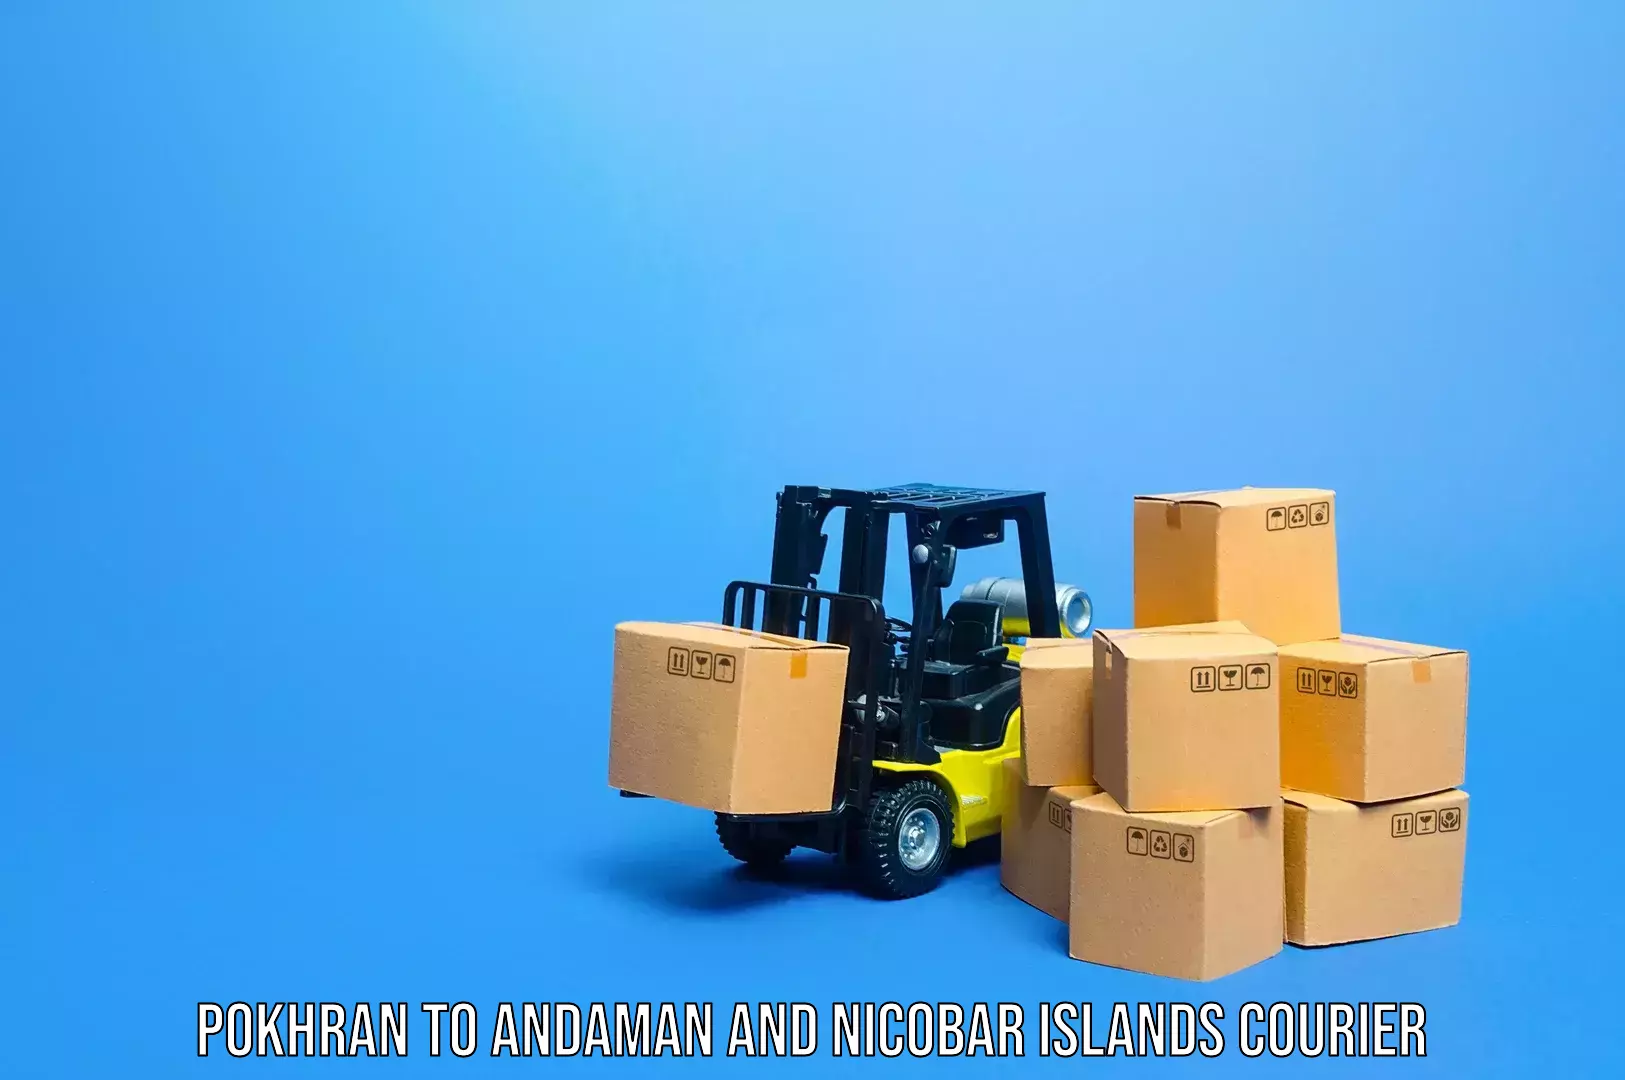 Luggage transport company in Pokhran to Andaman and Nicobar Islands